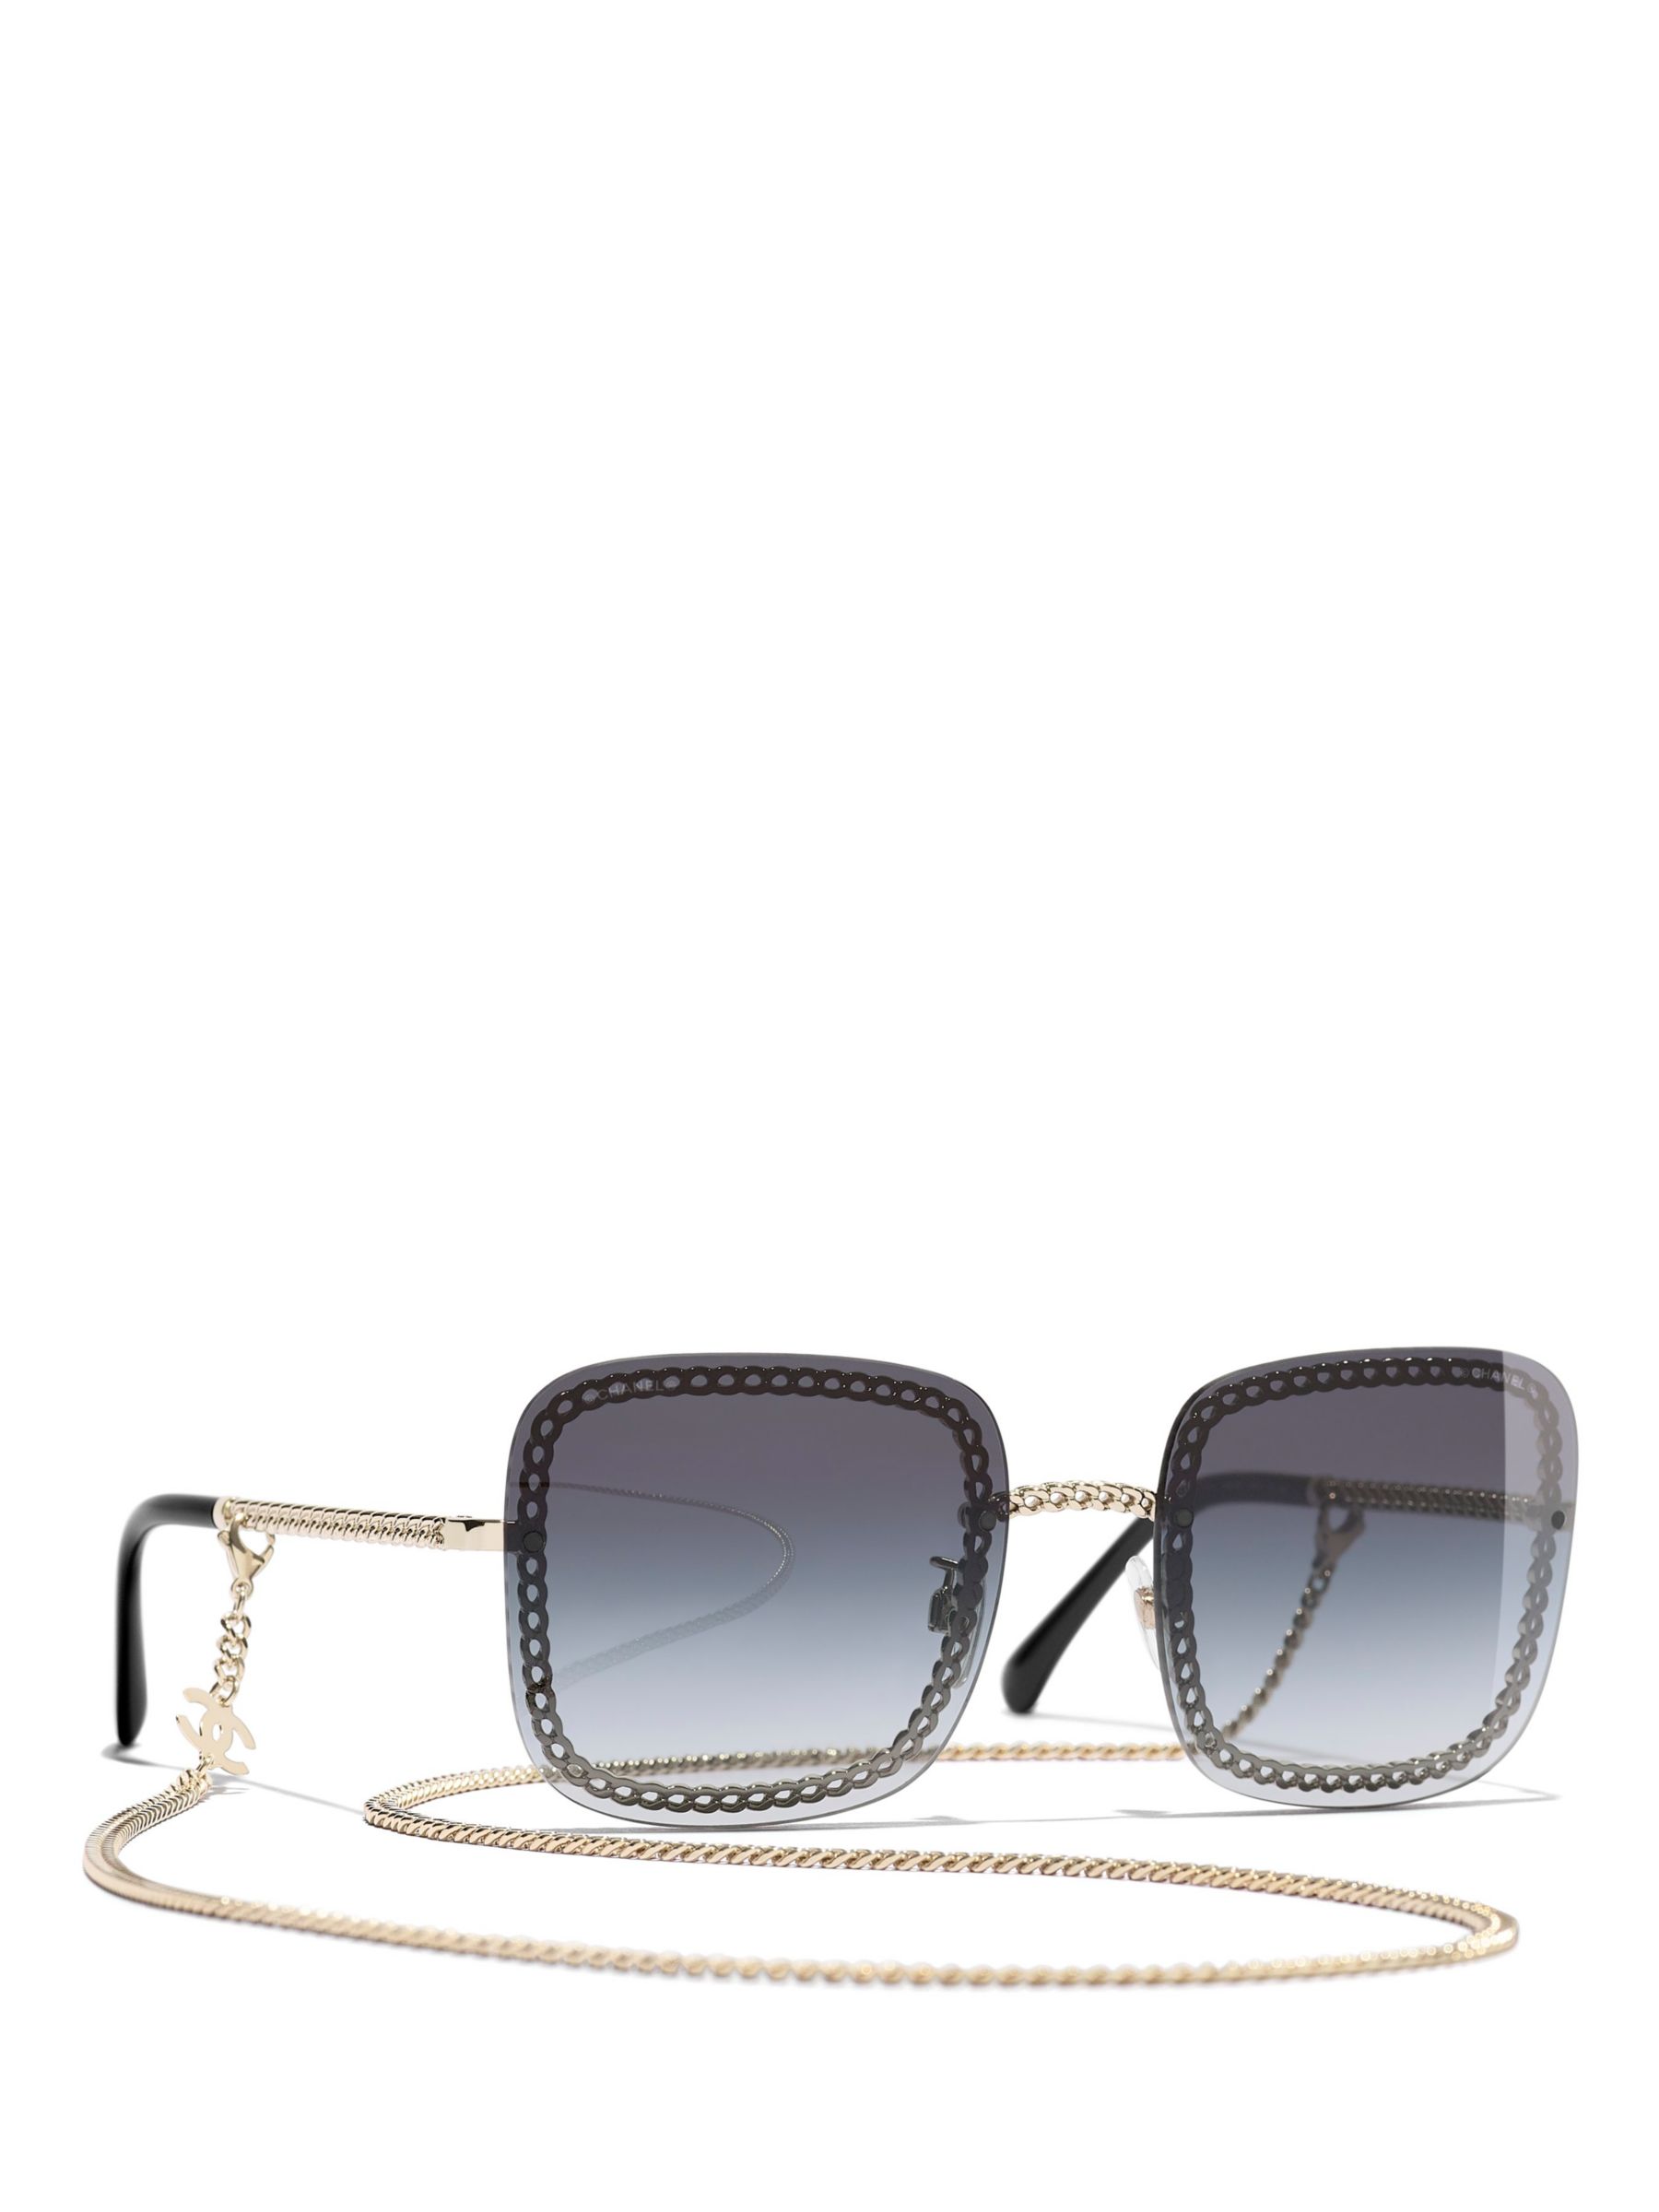 CHANEL Square Sunglasses CH4244 Gold/Grey at John Lewis & Partners